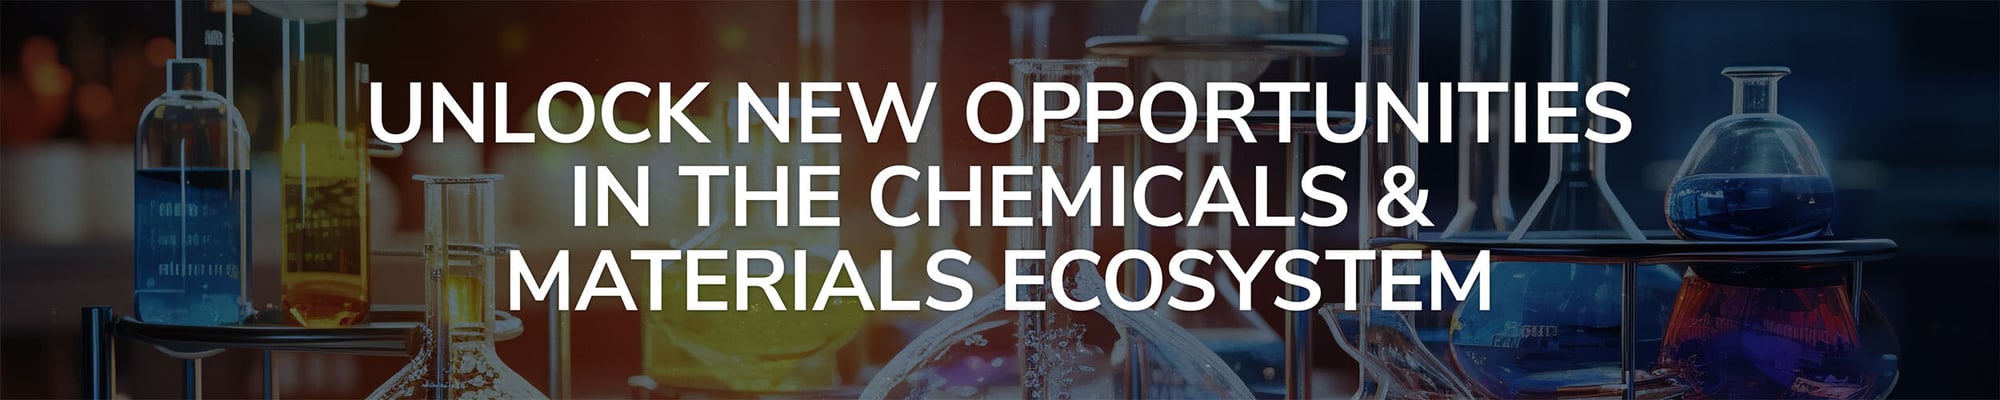 Unlocking Growth Opportunities in the Chemicals & Materials Industry